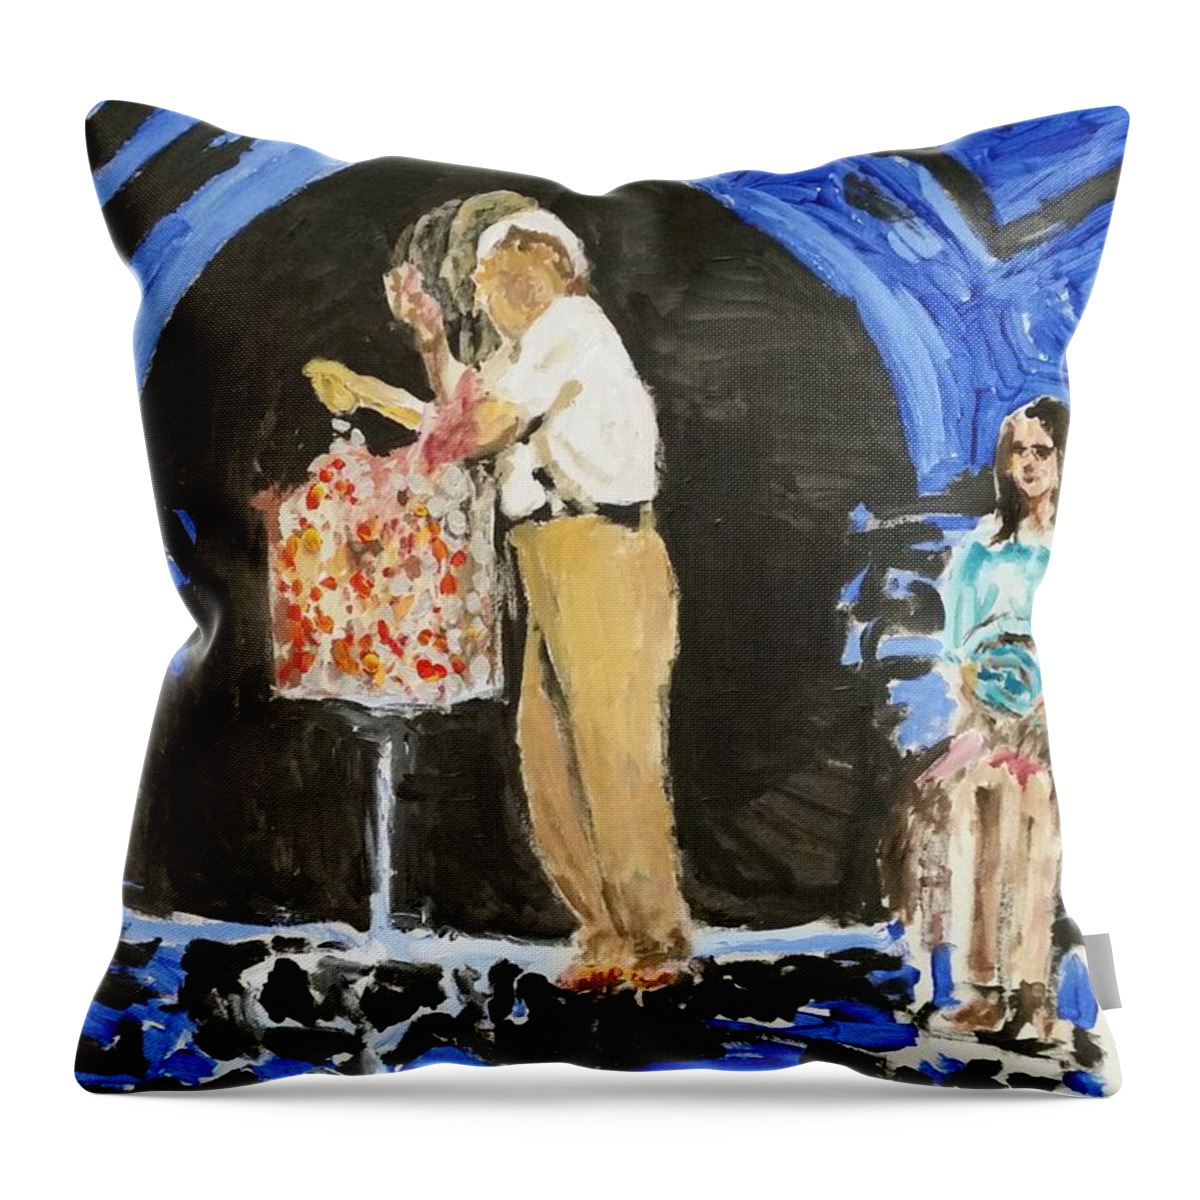 Performance Throw Pillow featuring the painting New Teller. Sketch II by Bachmors Artist